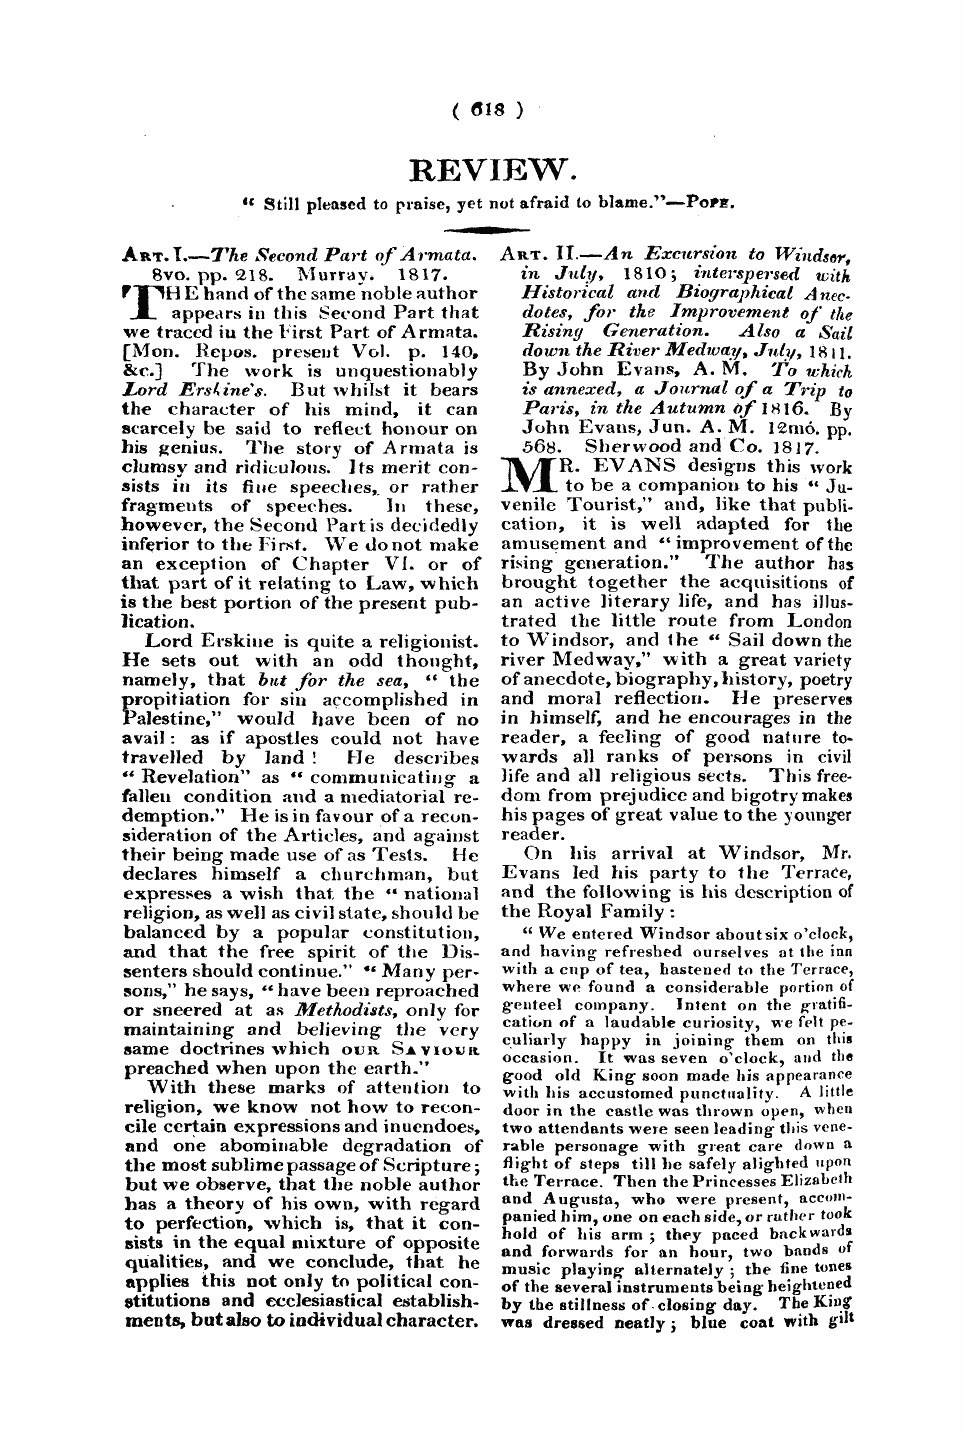 Monthly Repository (1806-1838) and Unitarian Chronicle (1832-1833): F Y, 1st edition - Review. U Still Pleased To Praise, Yet Not Afraid To Blame."— Po*».